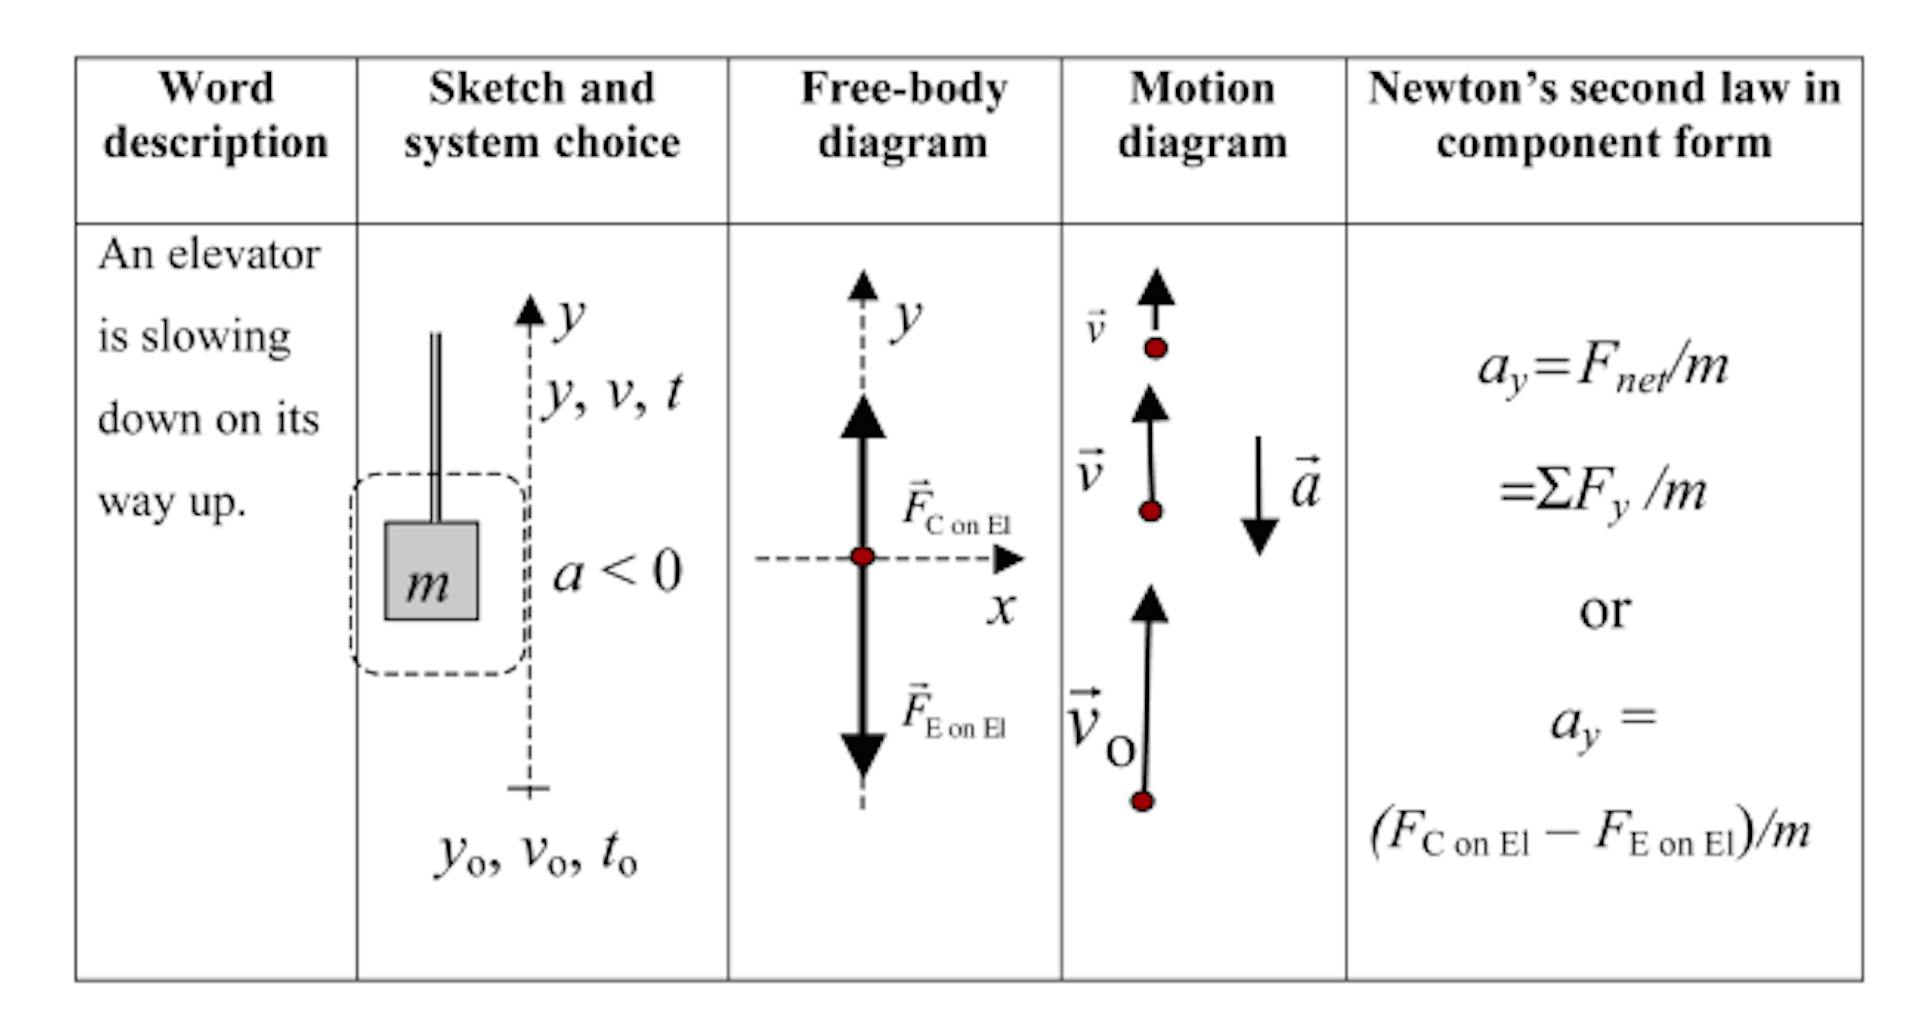 Figure-19: Source (https://apcentral.collegeboard.org/pdf/physics-multiple-representations-knowledge-sf.pdf?course=ap-physics-2)